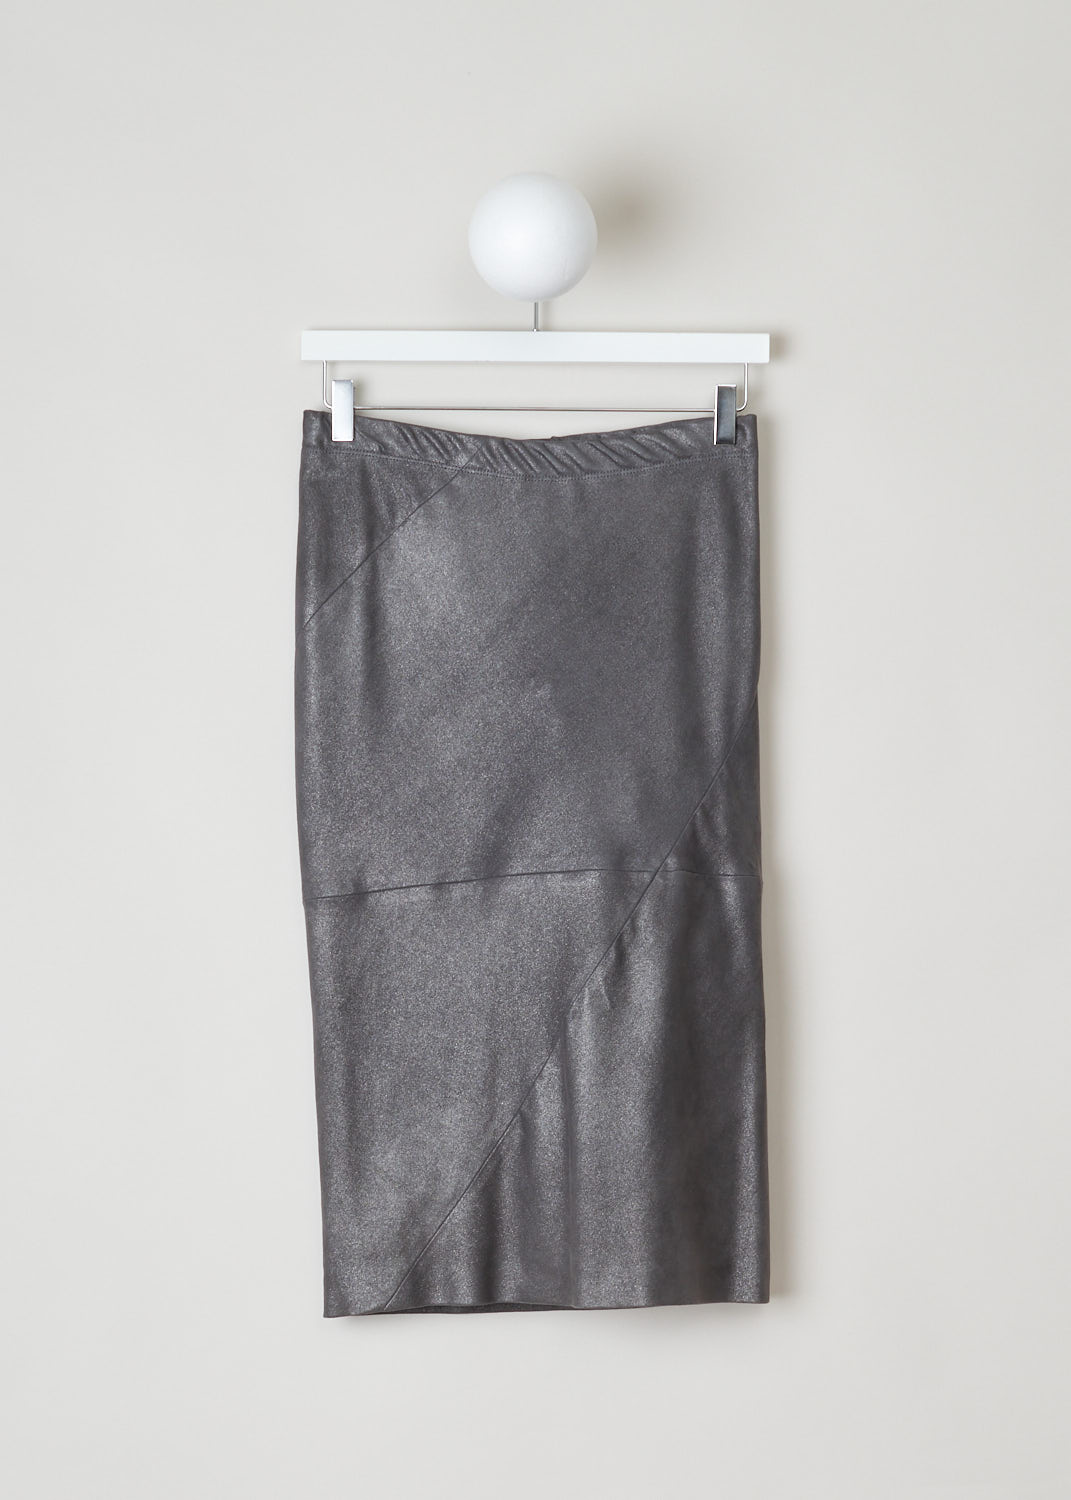 Brunello Cucinelli, Silver grey leather pencil skirt, M0NP0G2738_C079, grey, front, Silver grey leather skirt. This long pencil skirt falls just below the knees. The leather has a stretch and has a light silver sparkle. The leather patches are sewn together diagonally for a unique look. This model has no closure and has an elastic waistband.